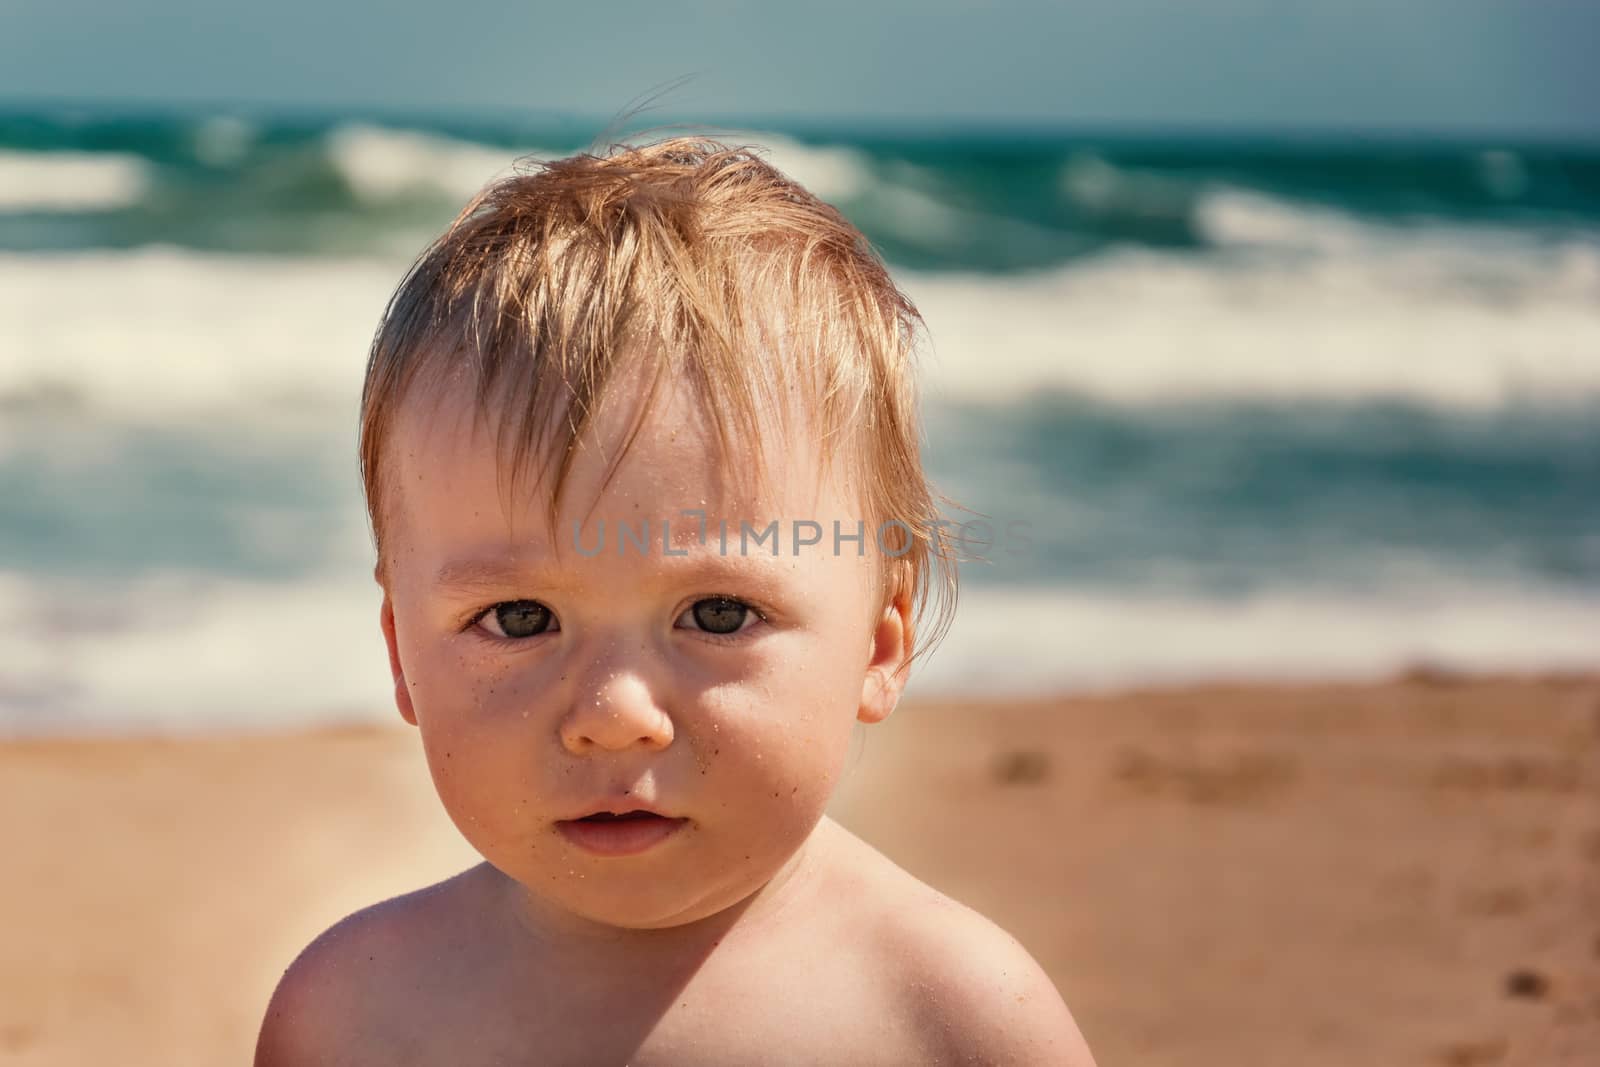 Adorable infant boy looking at camera at summertime. Young caucasian baby at tropical beach with ocean wave behind him. Male kid portrait on his first vacations at sandy beach. Curiosity expression.